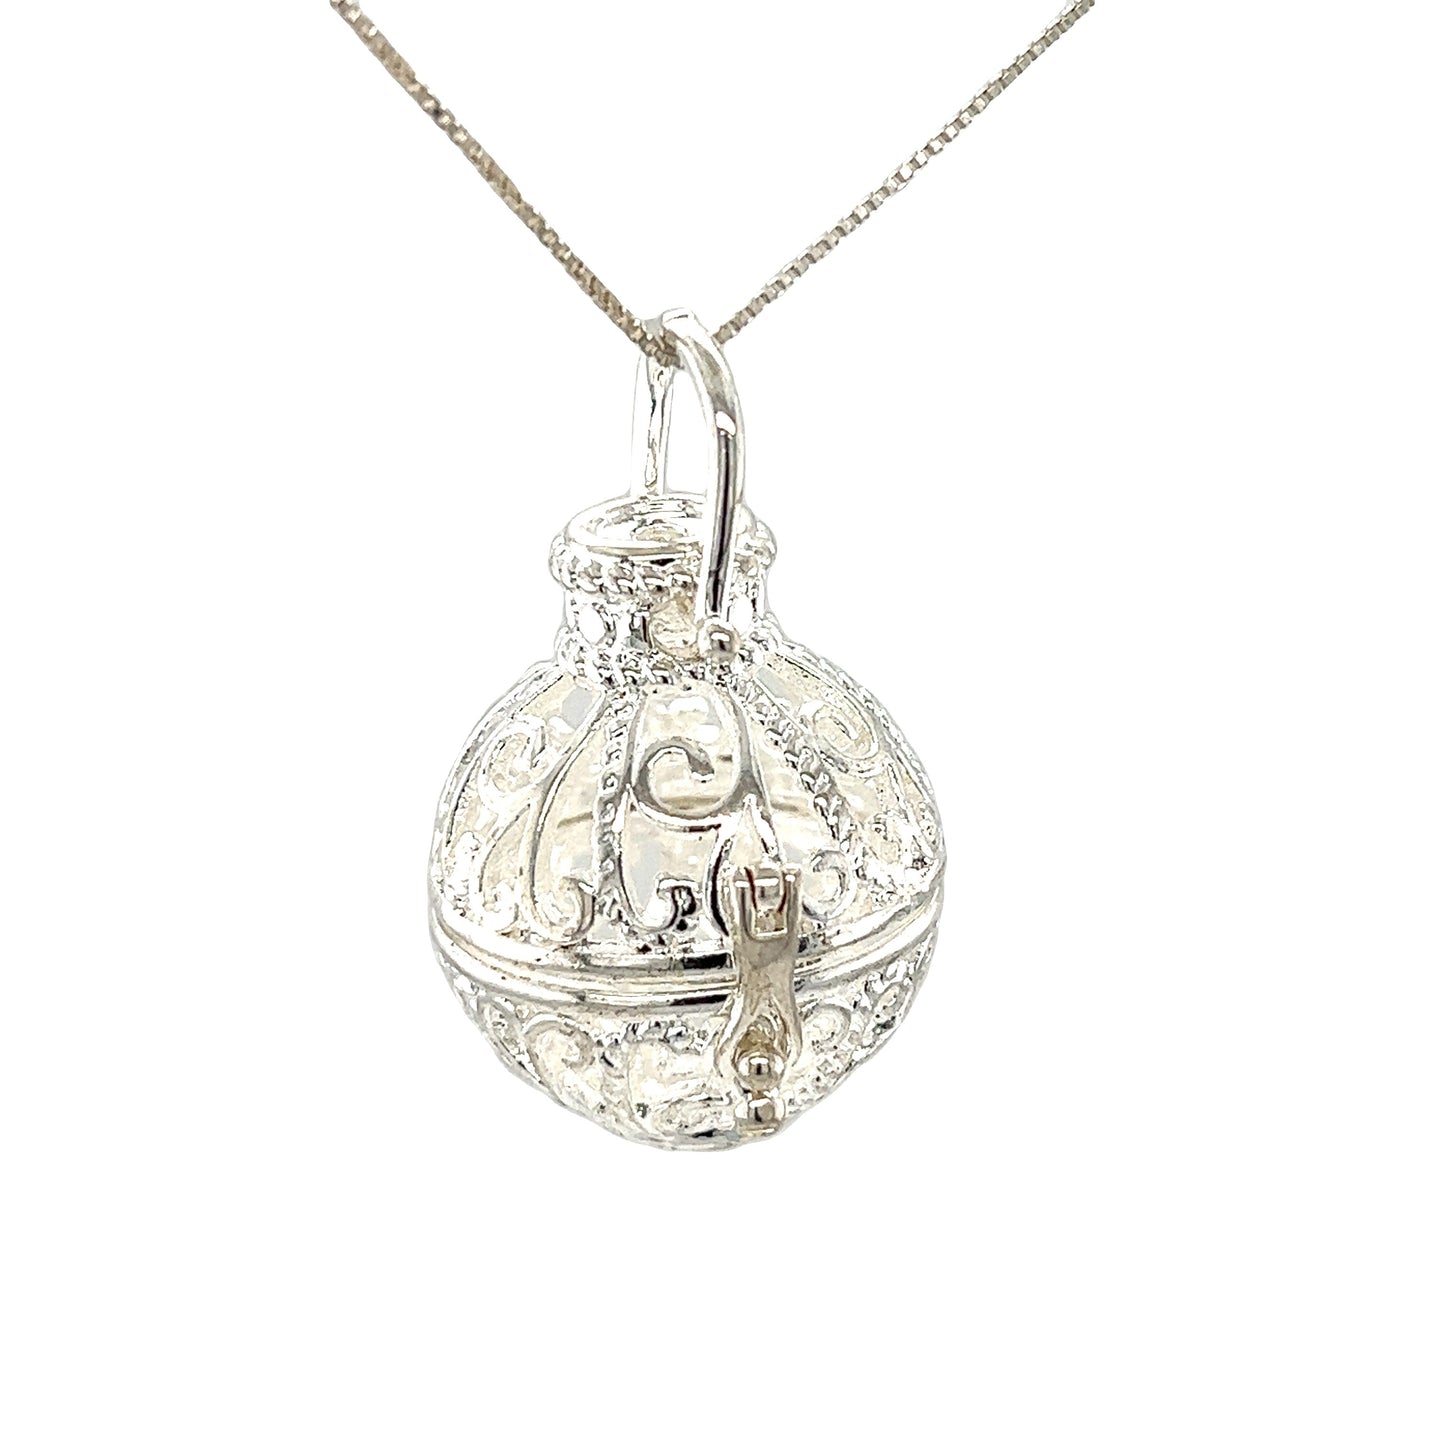 A boho vibe is embodied in this ornate Super Silver Filigree Cage Pendant on a chain, reminiscent of Bali cage pendants.